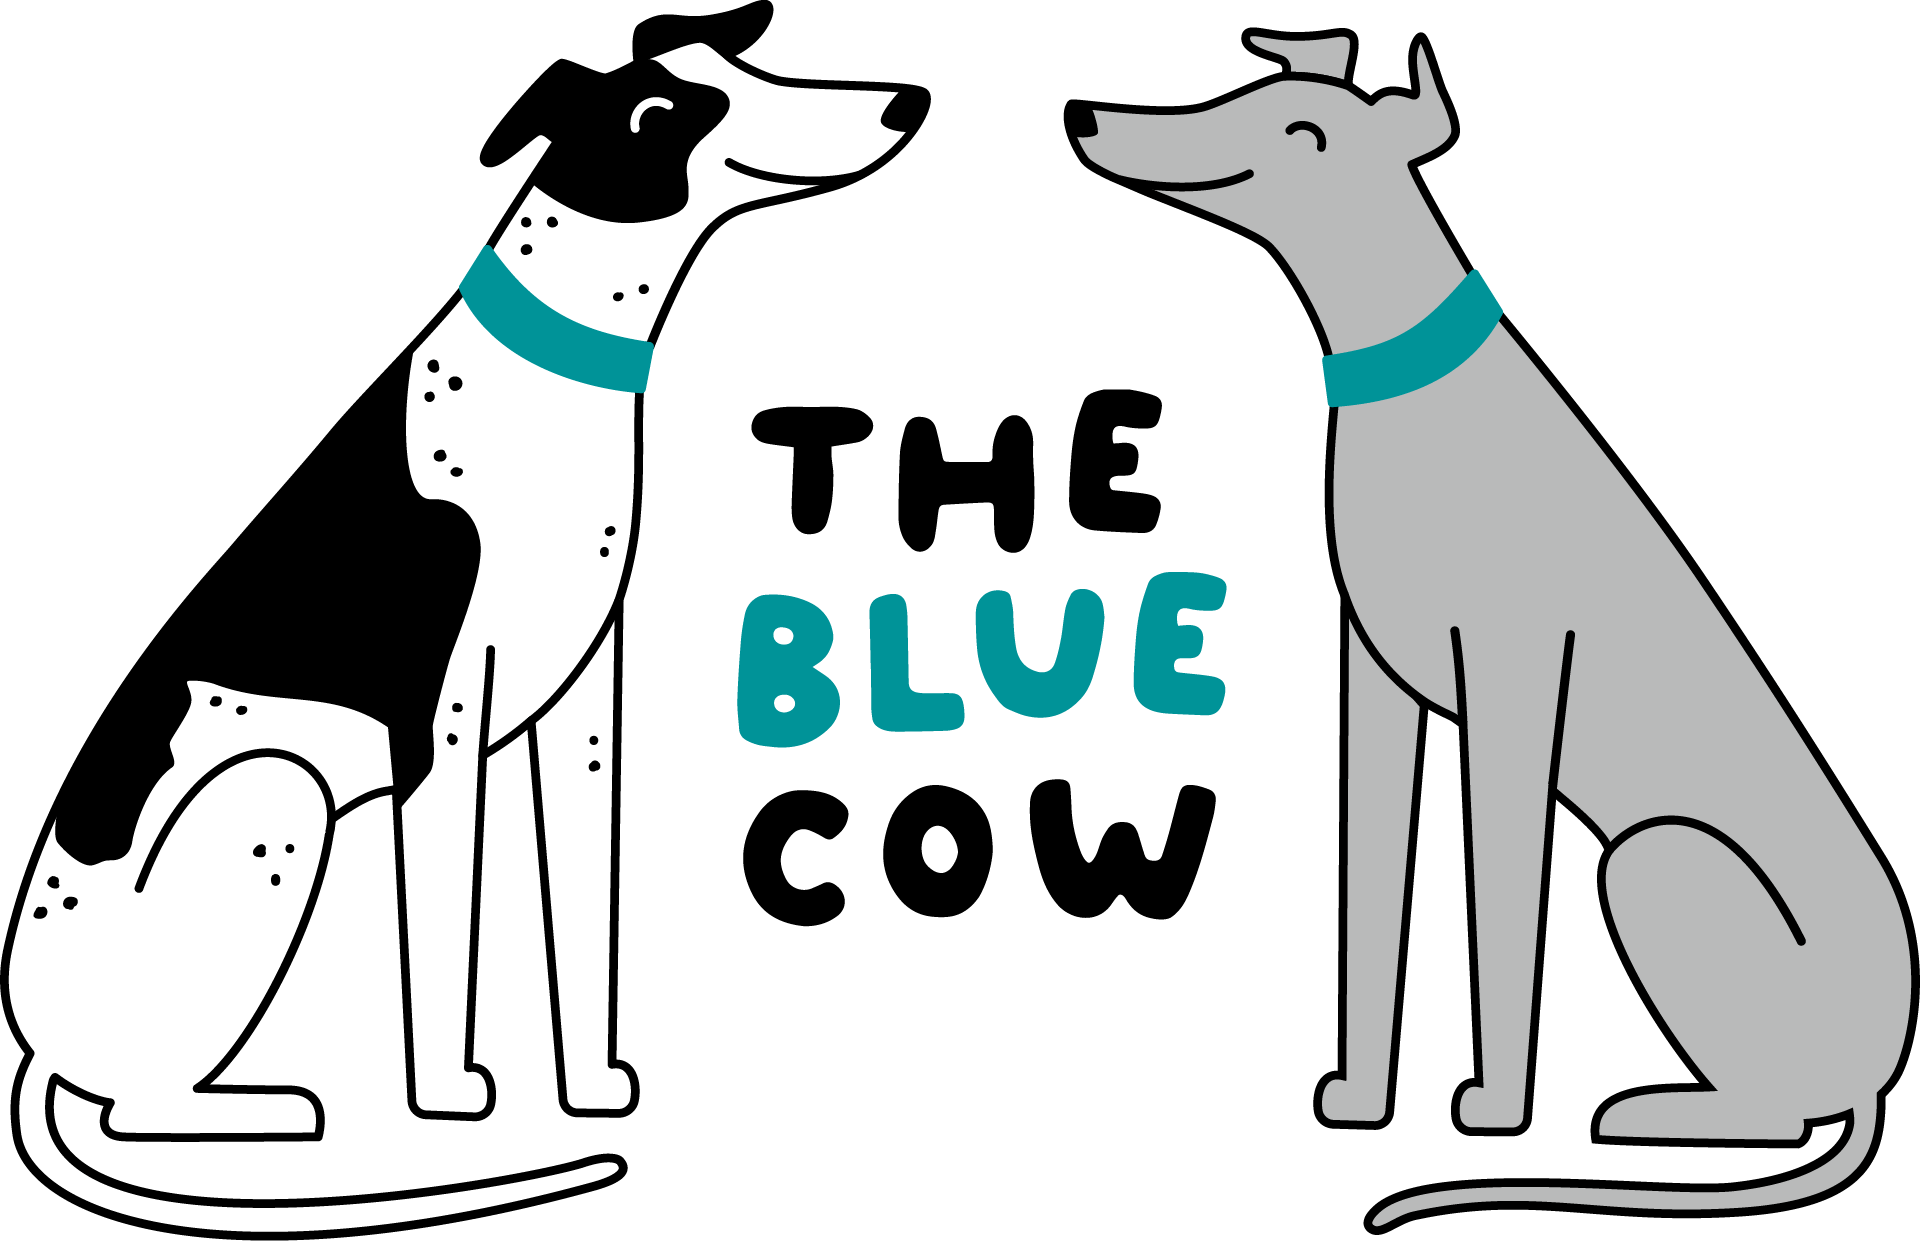 The Blue Cow logo, with two greyhounds wearing blue collars on either side of the words